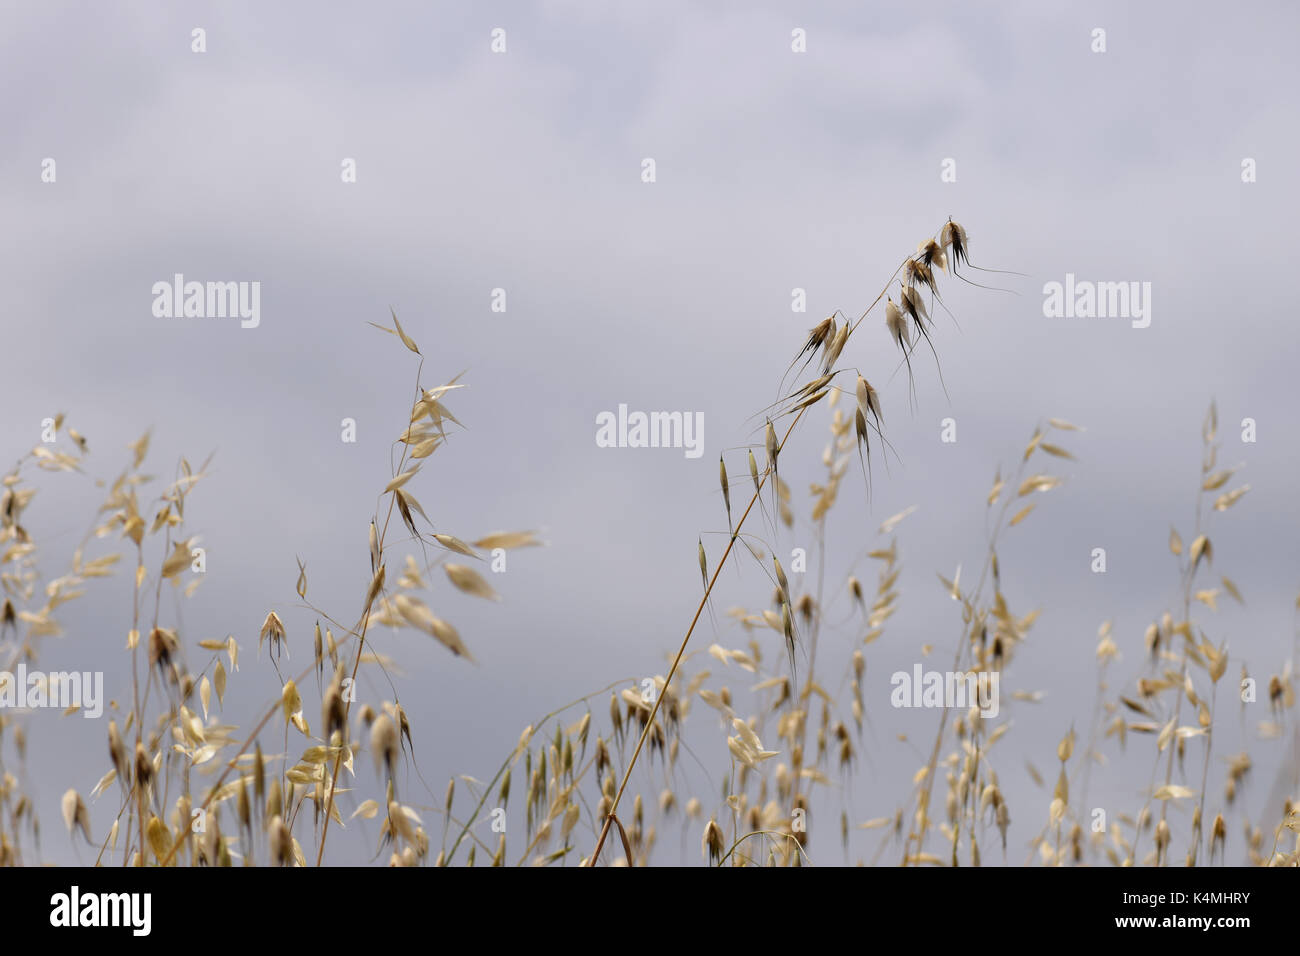 Oat straw withered plants on windy day. Summer nature abstract selective focus. Stock Photo